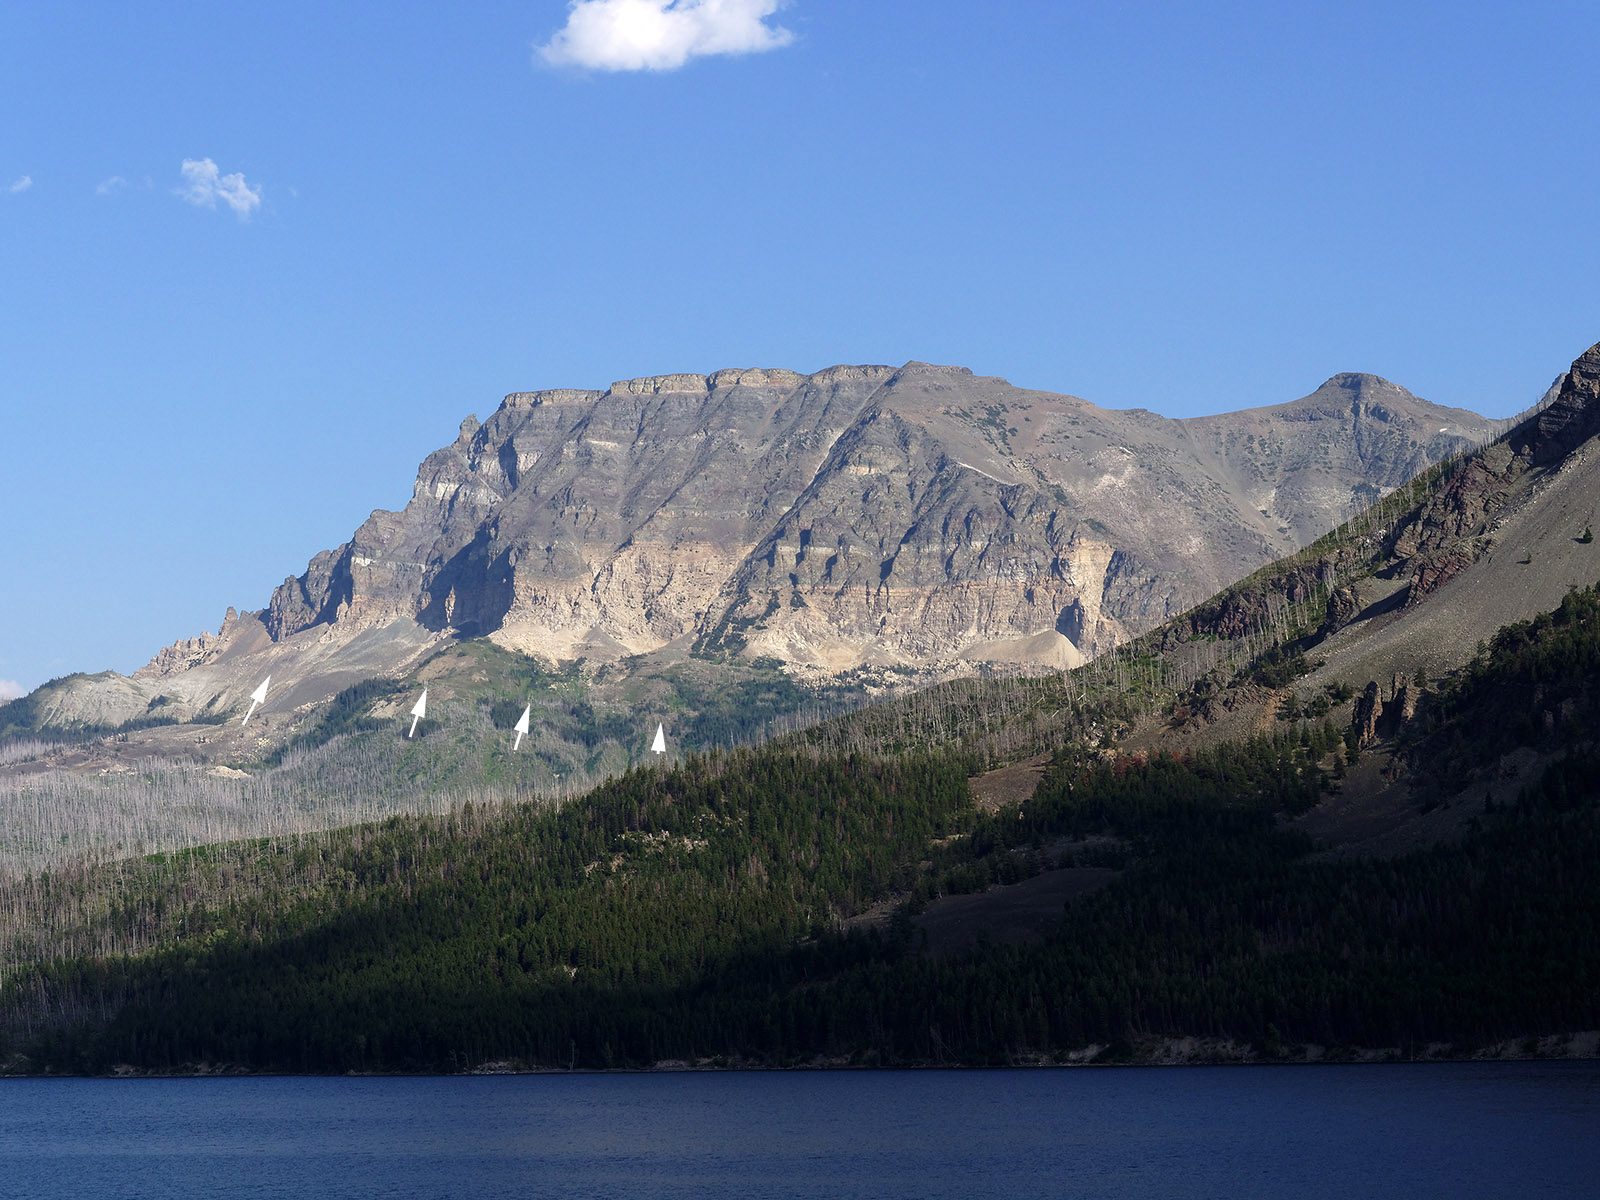 Curly Bear Mountain at the eastern entrance to Glacier National Park.  The Lewis Overthrust Fault extends (arrows) with Precambrian strata over Cretaceous layers.